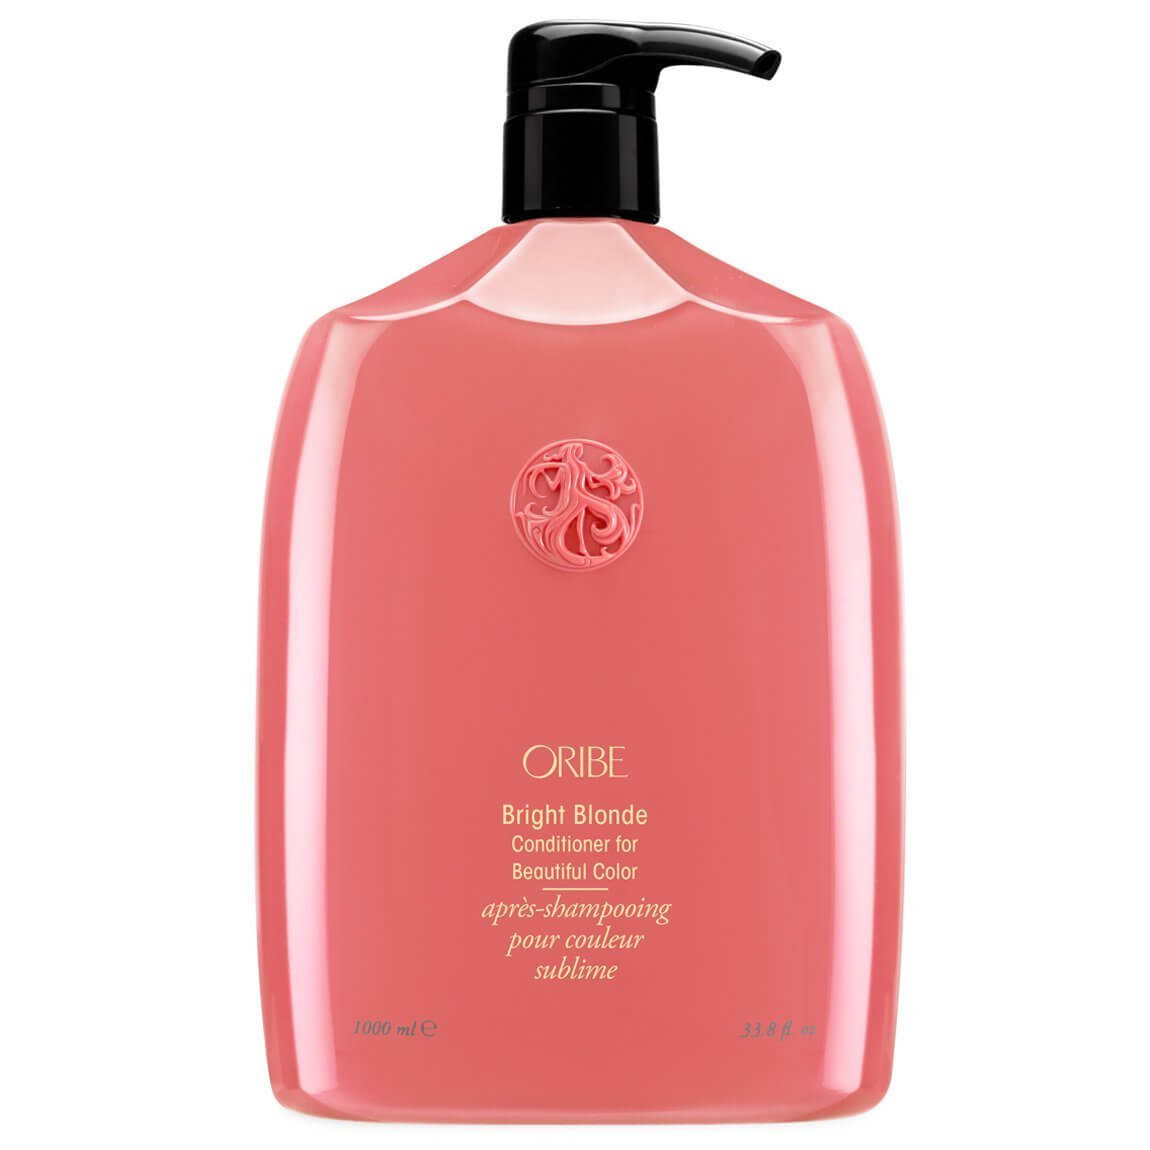 Bright Blonde Conditioner for Beautiful Colour by Oribe litre